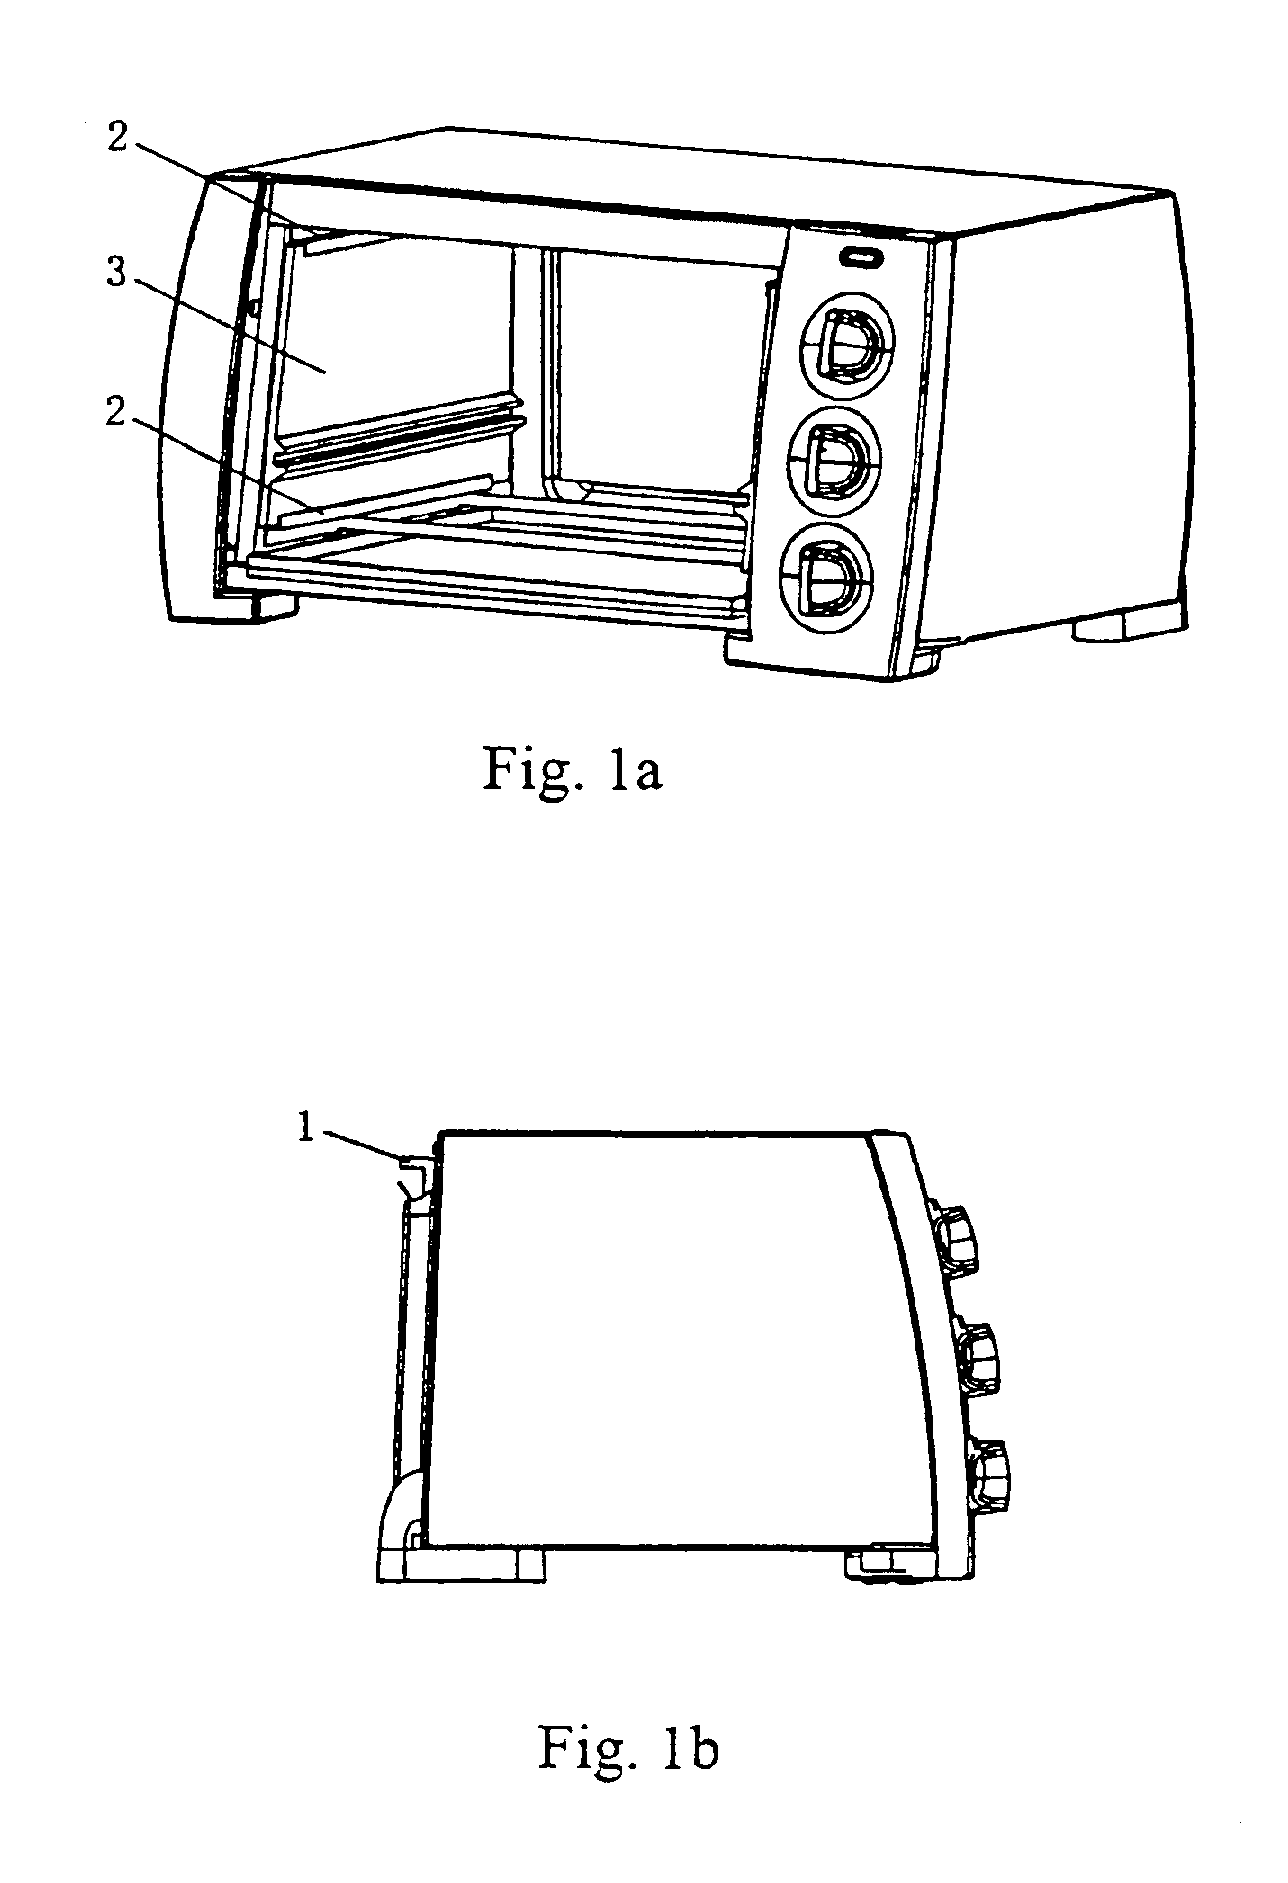 Electrical oven with detachable liners